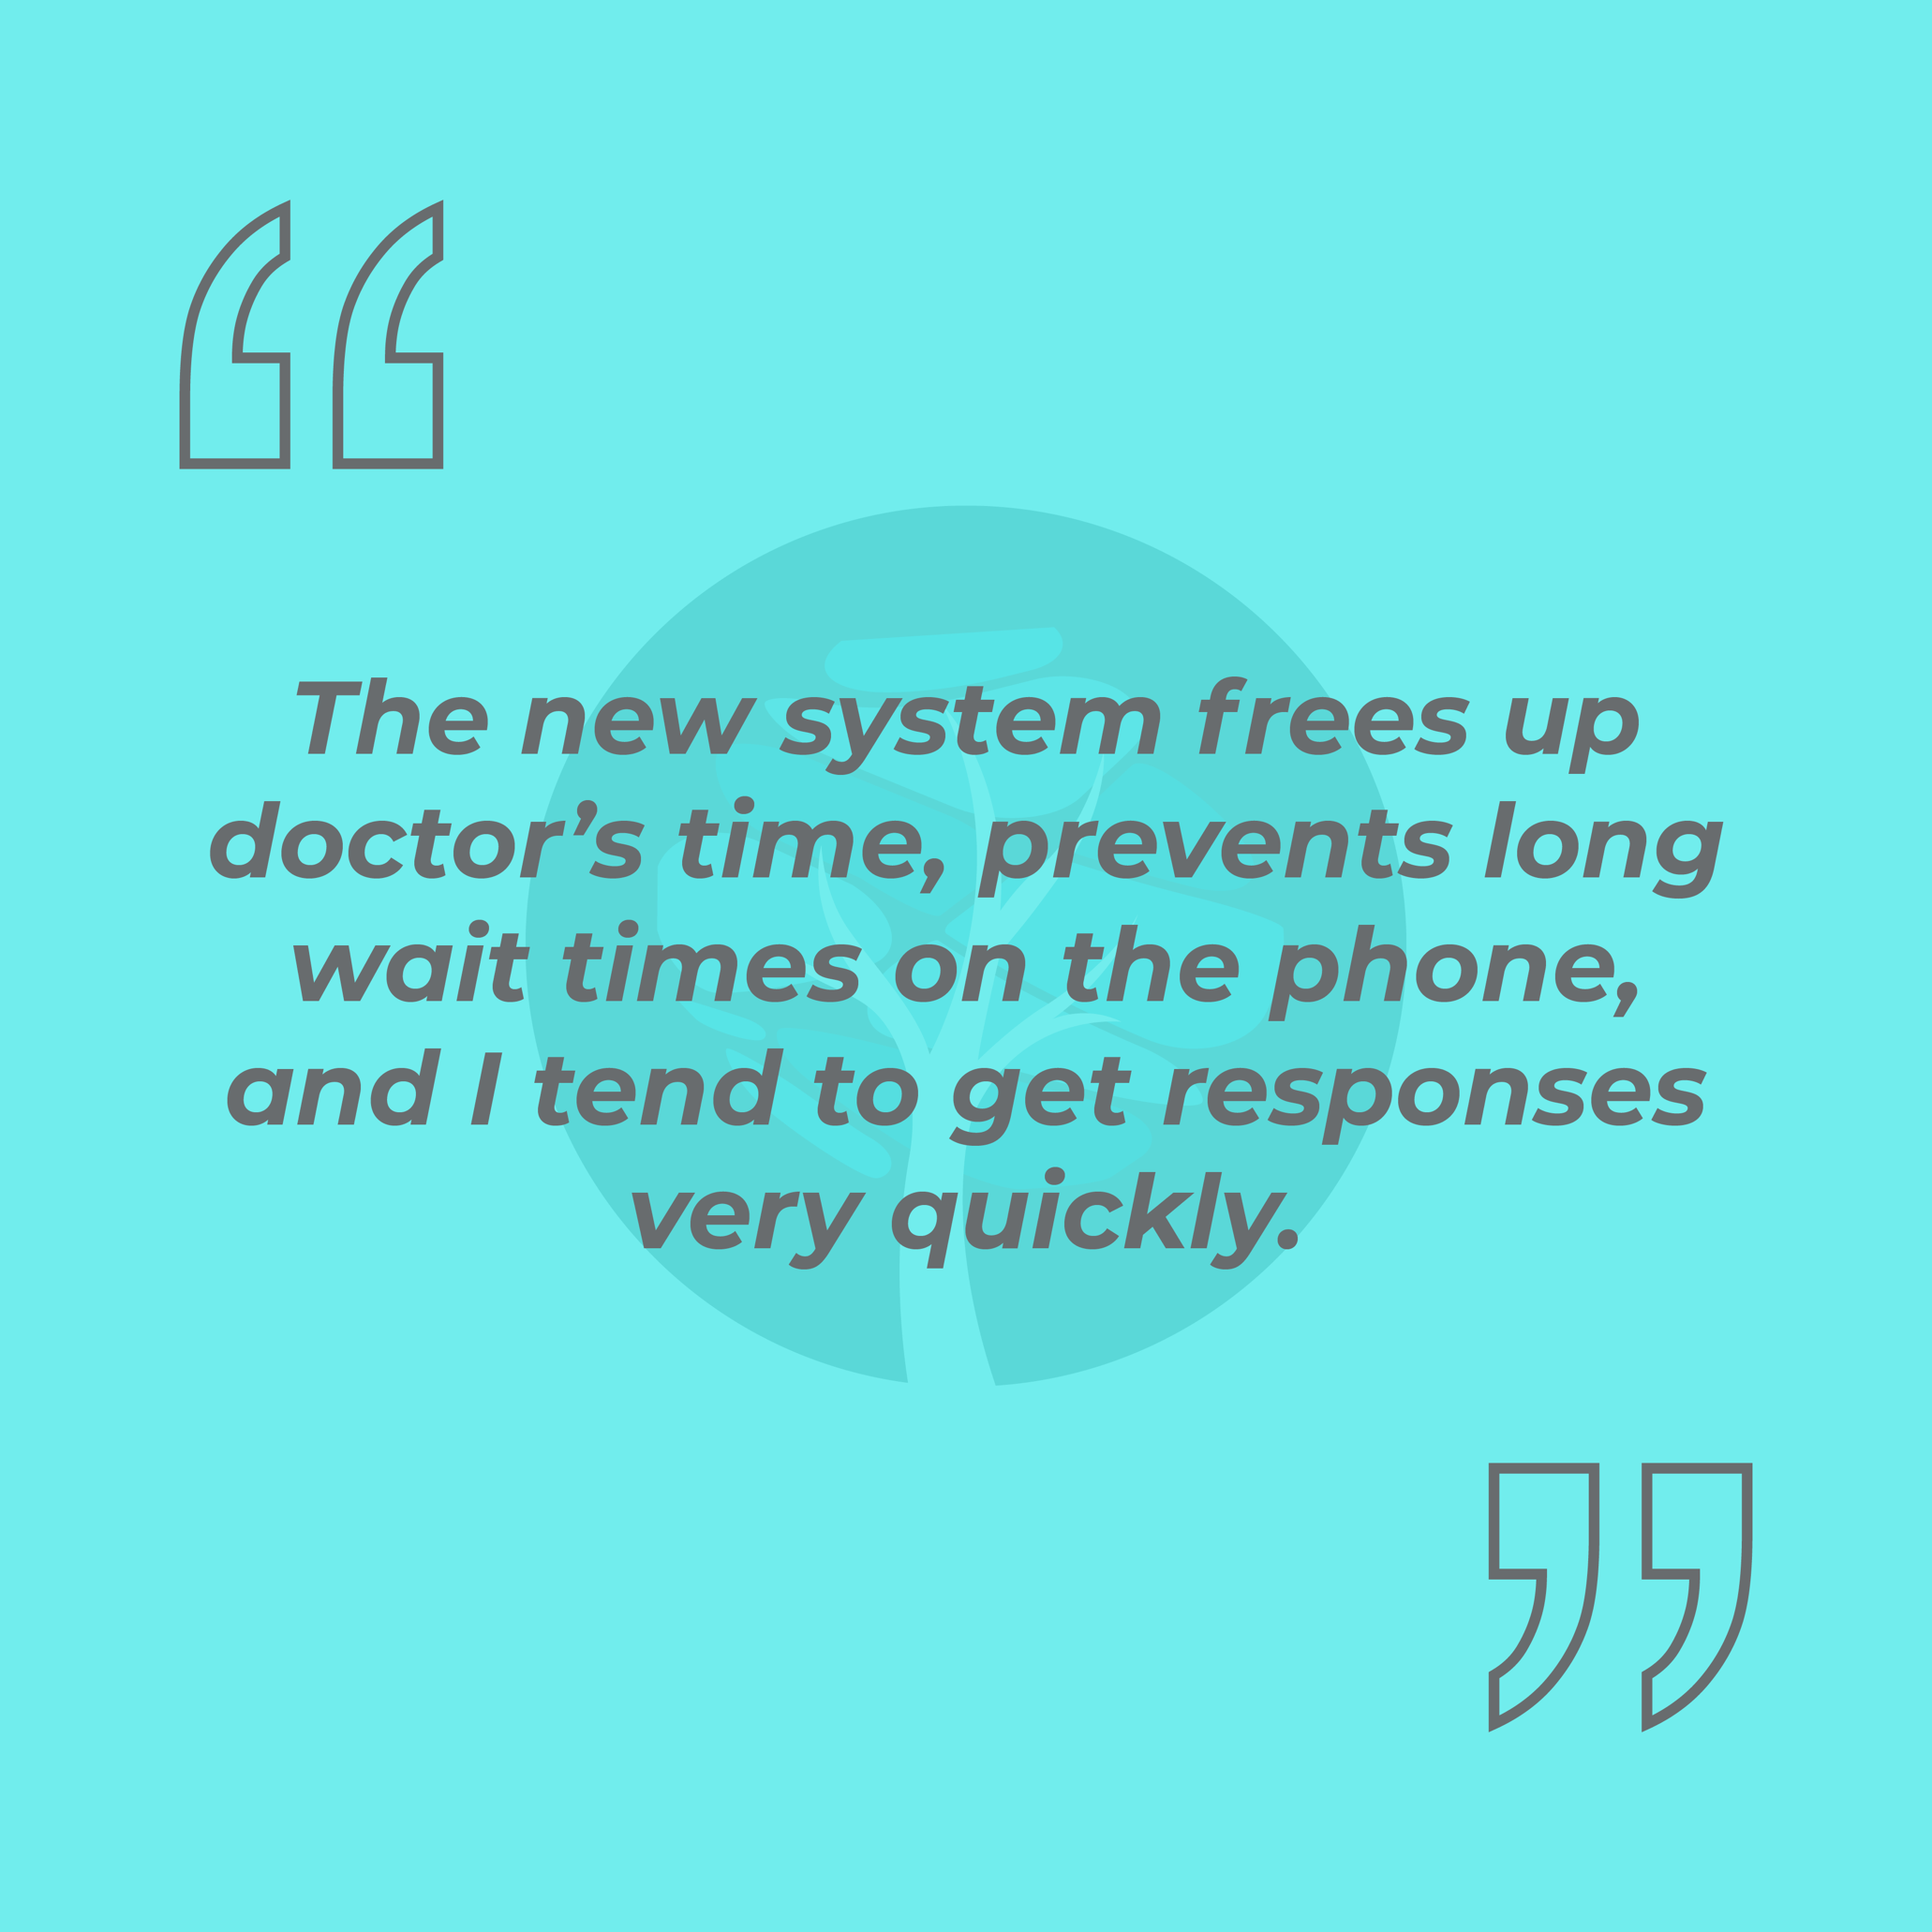 The new system frees up doctor’s time, prevents long wait times on the phone, and I tend to get responses very quickly.